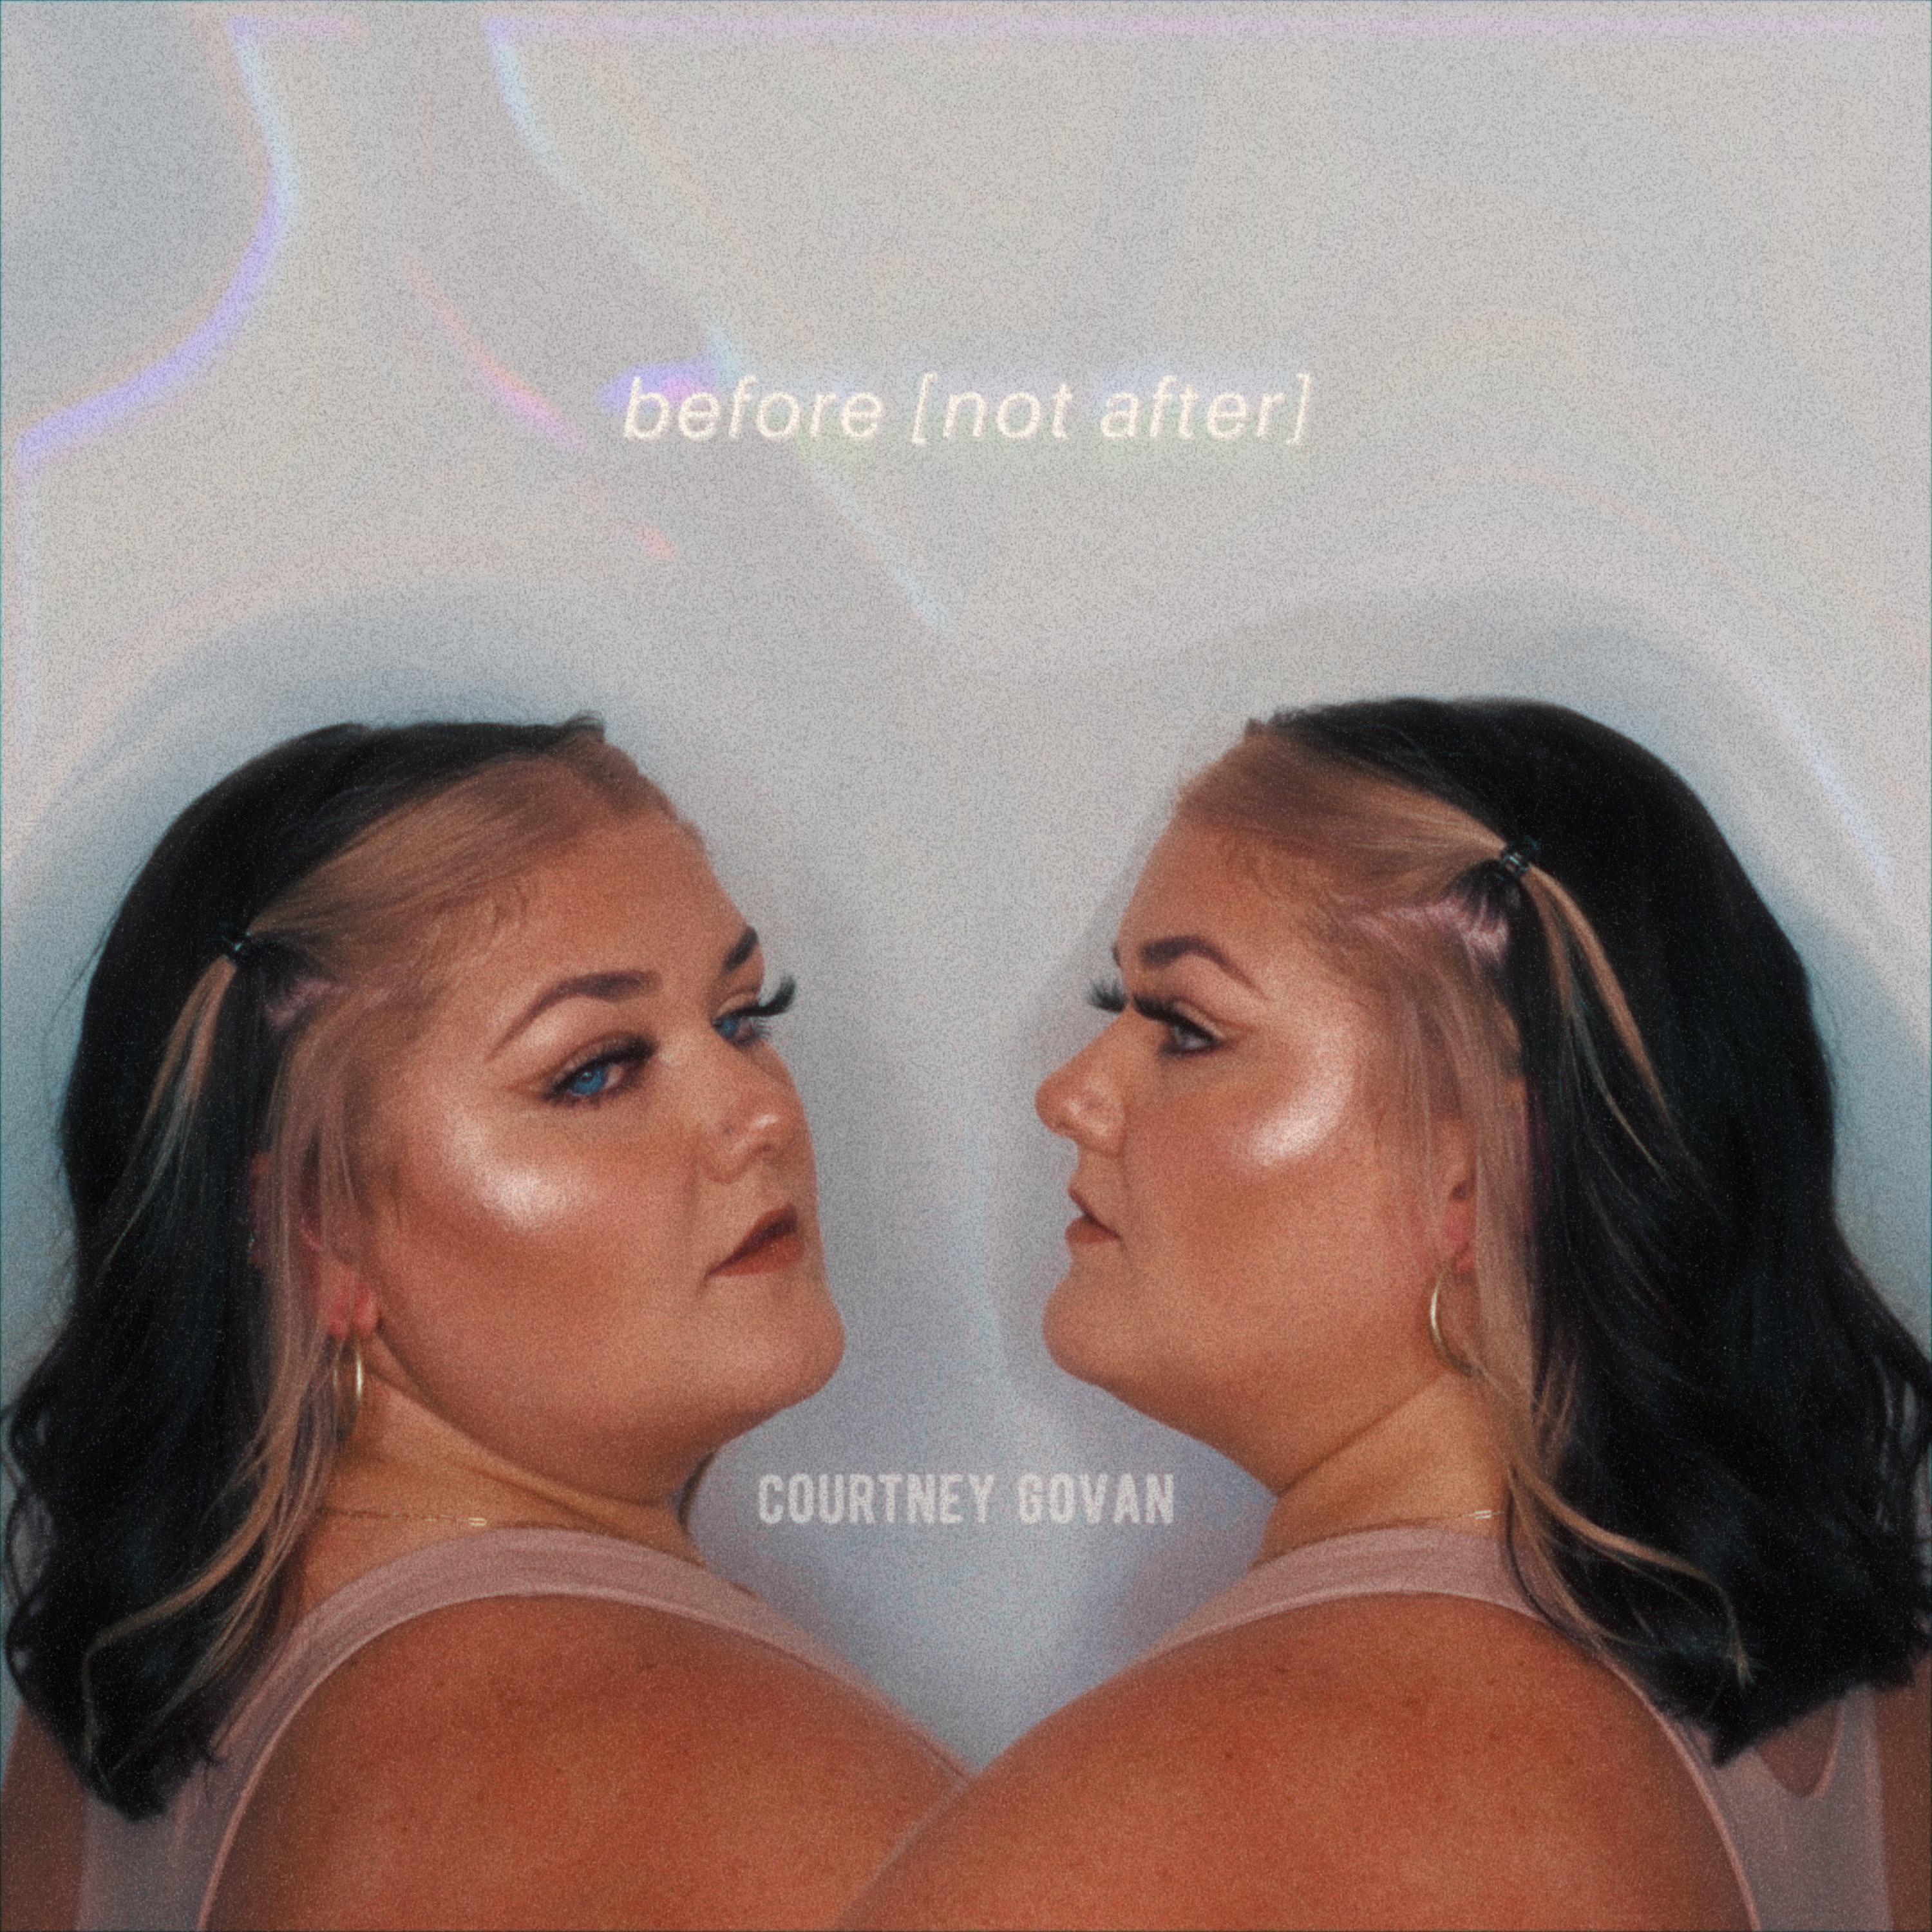 Courtney Govan - before (not after)